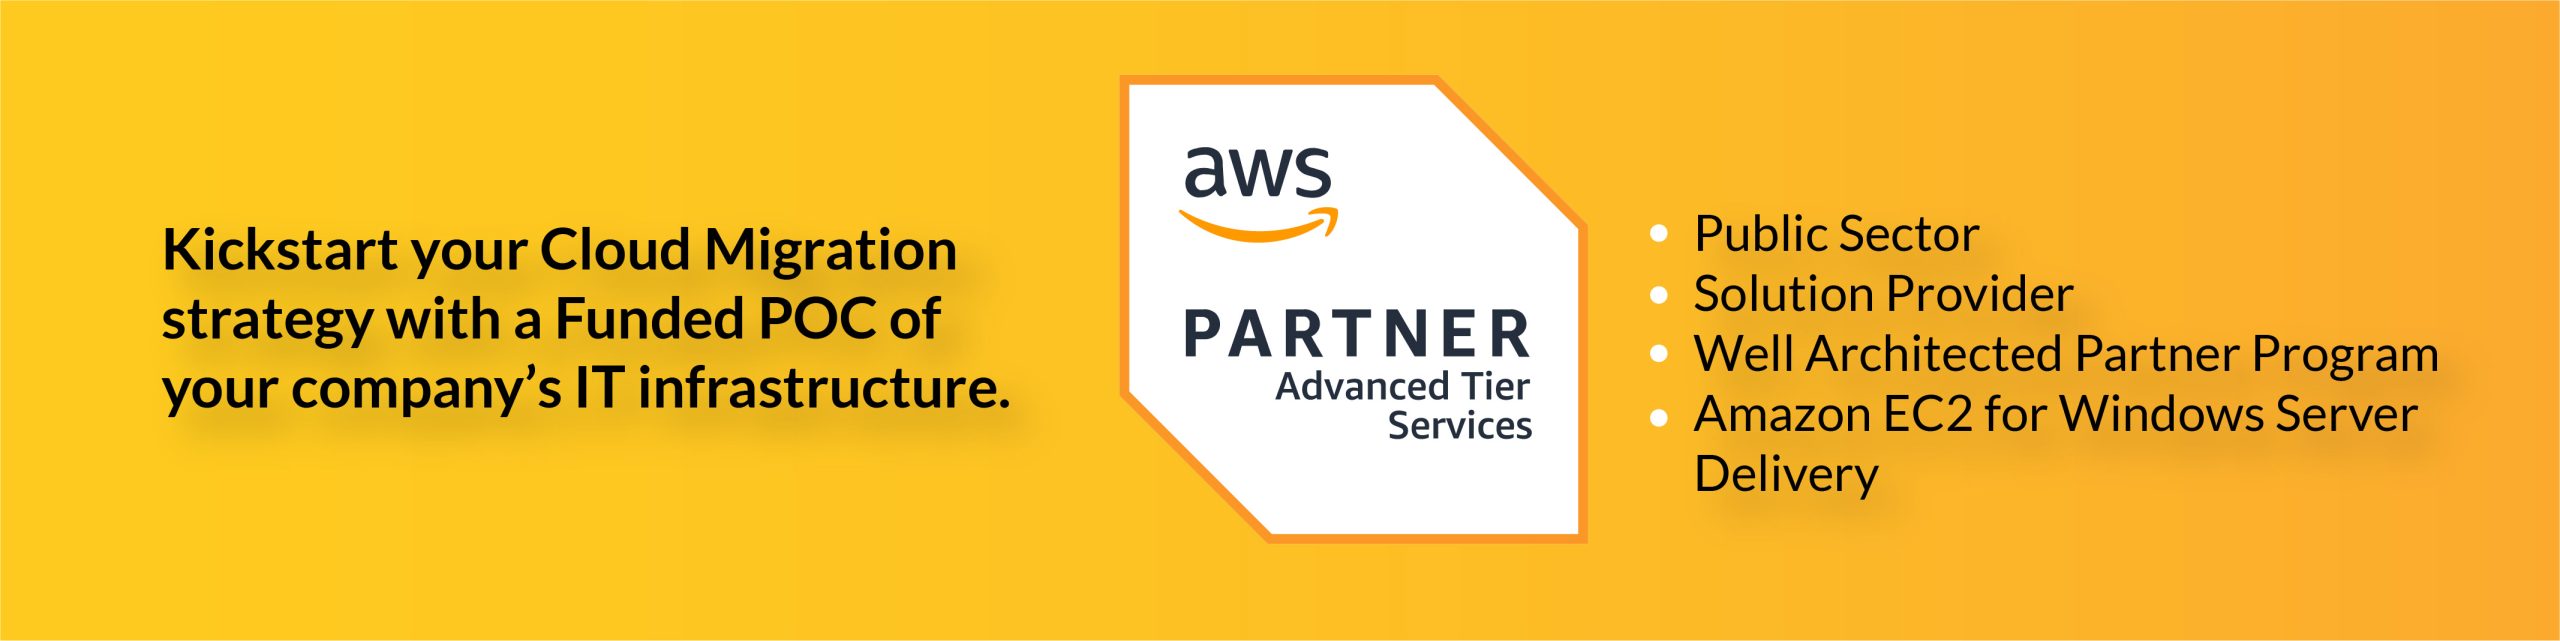 AWS Managed Services Partner